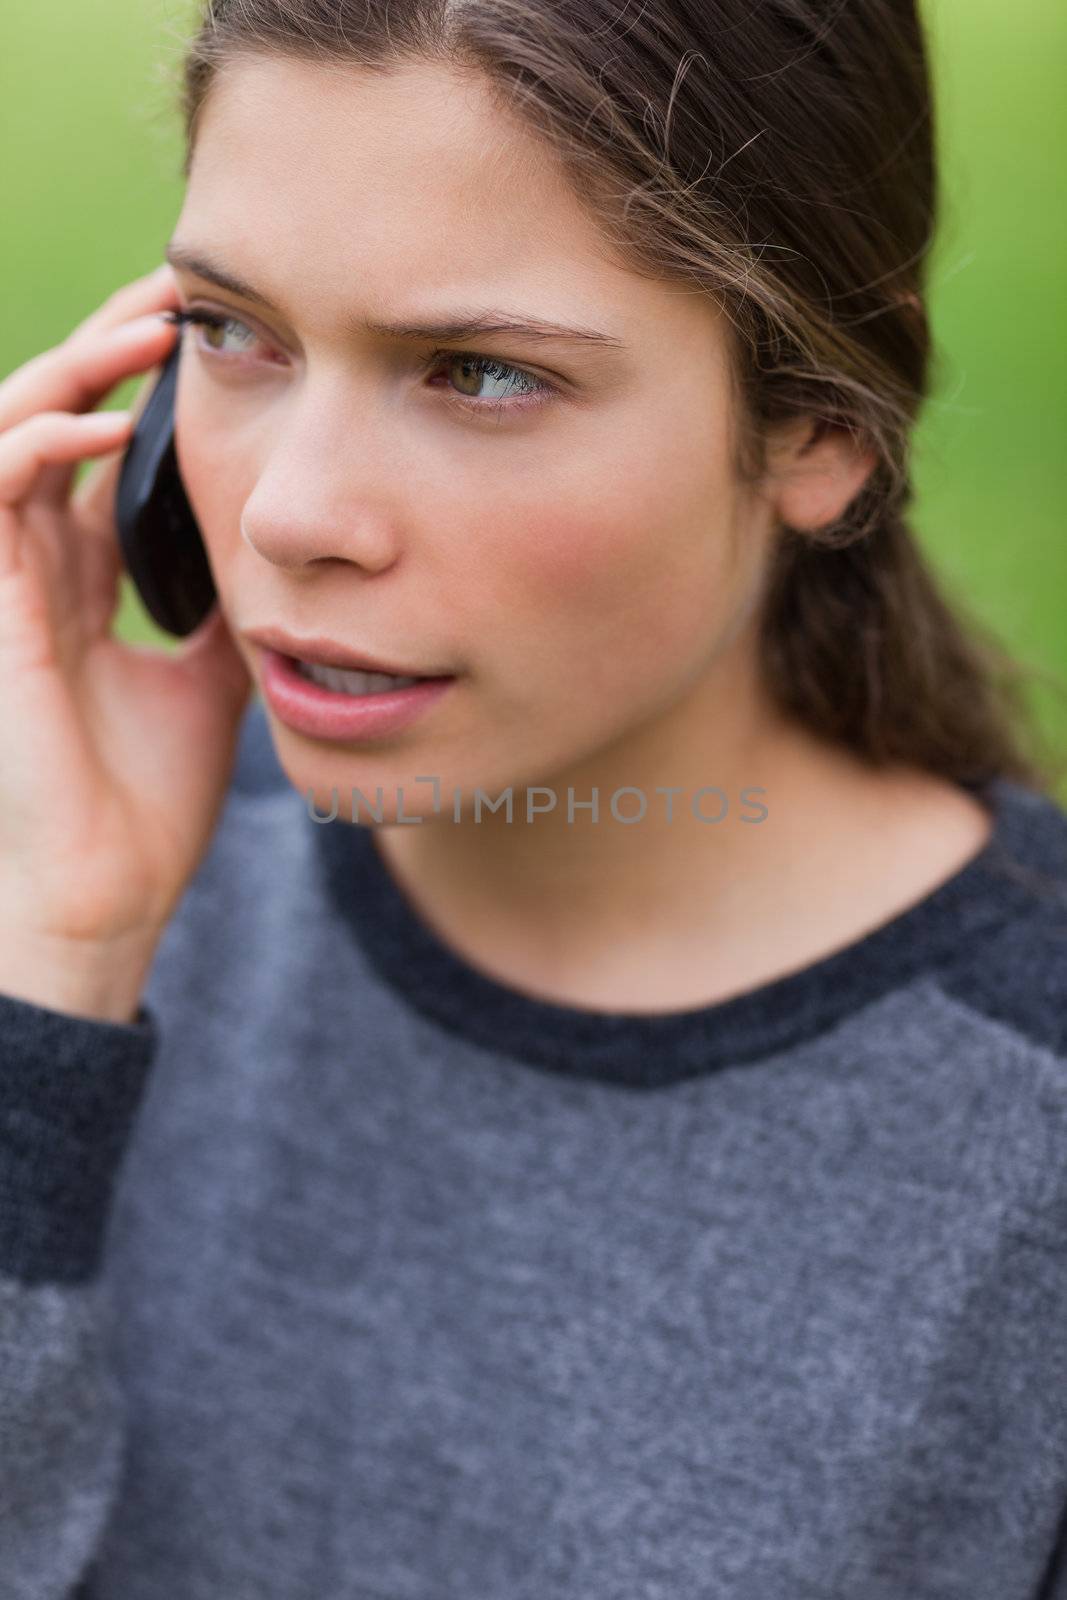 Serious teenager talking with her mobile phone while looking towards the side